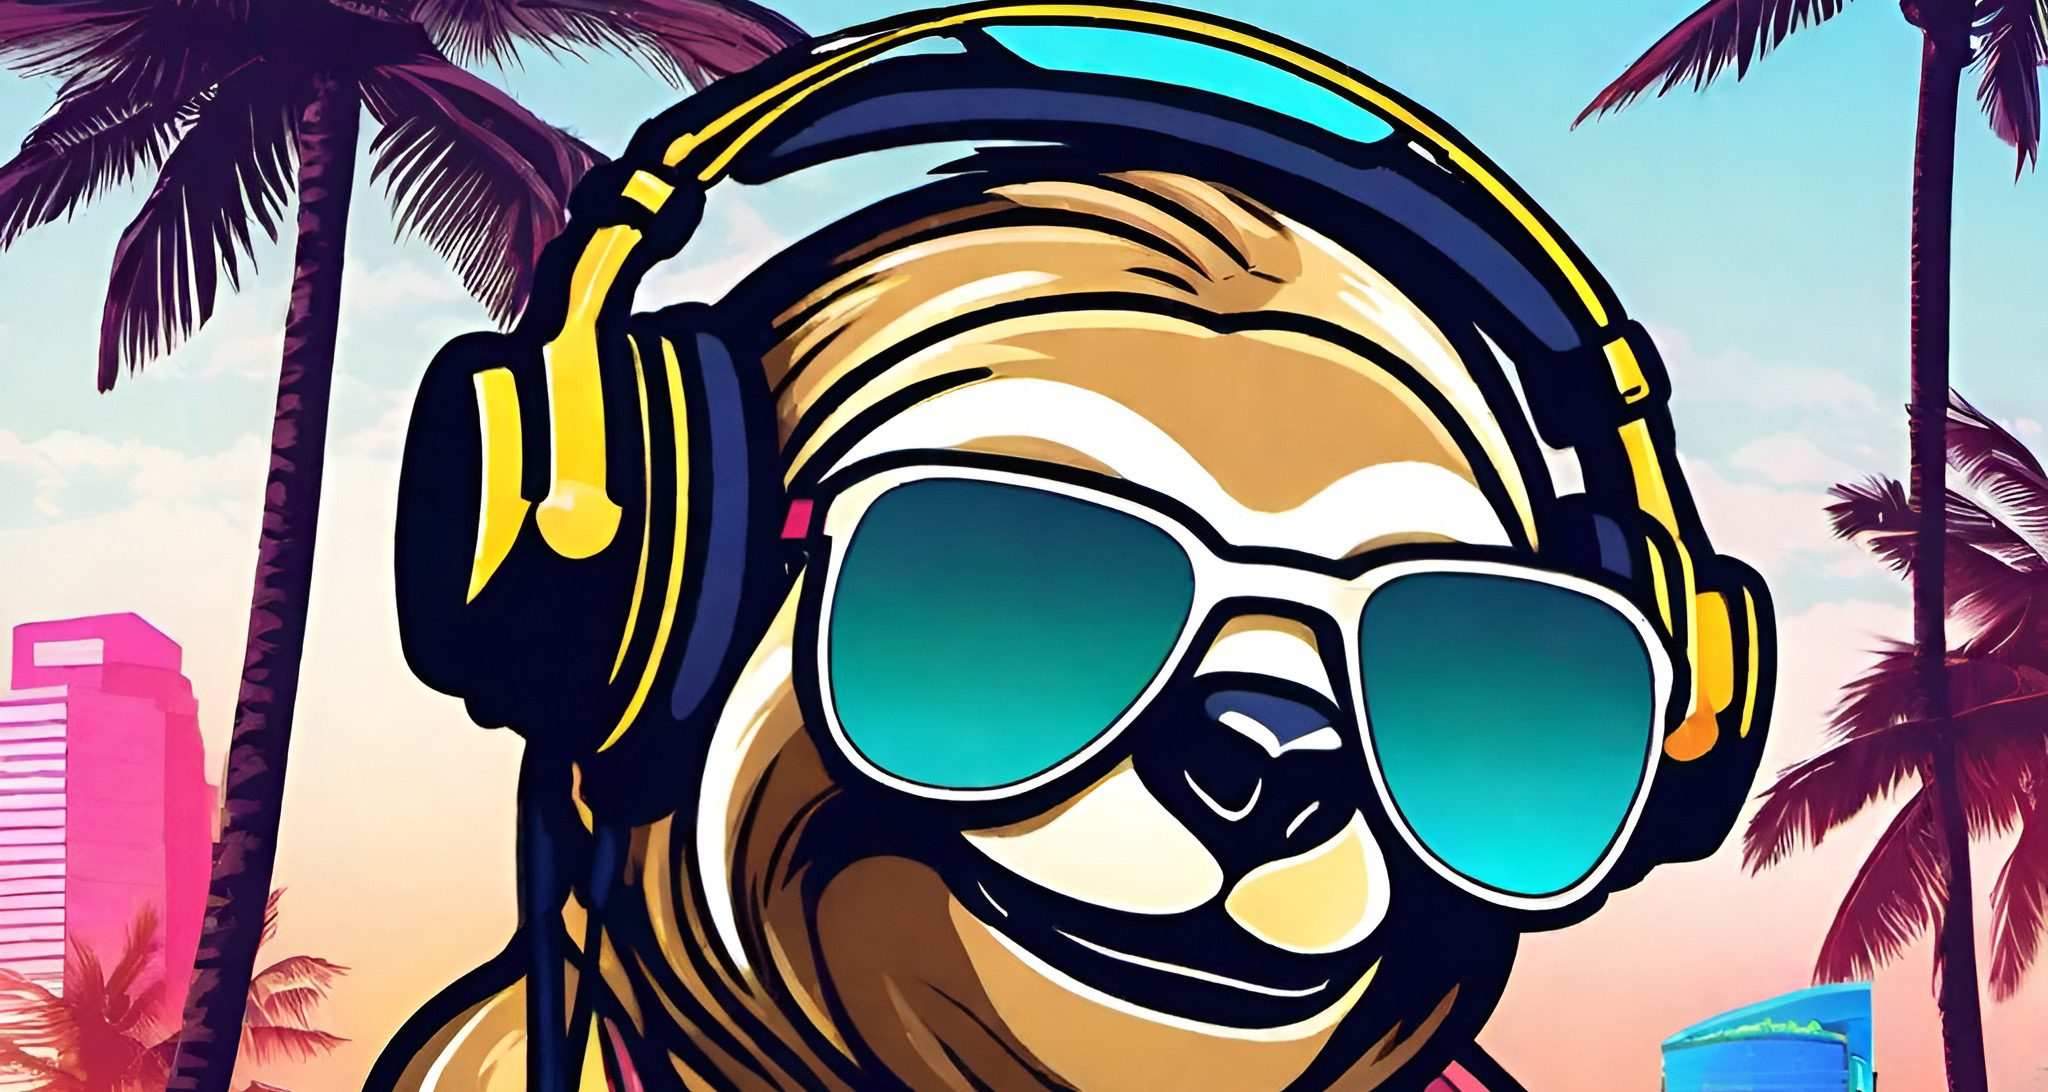 Sloth with headphones and sunglasses